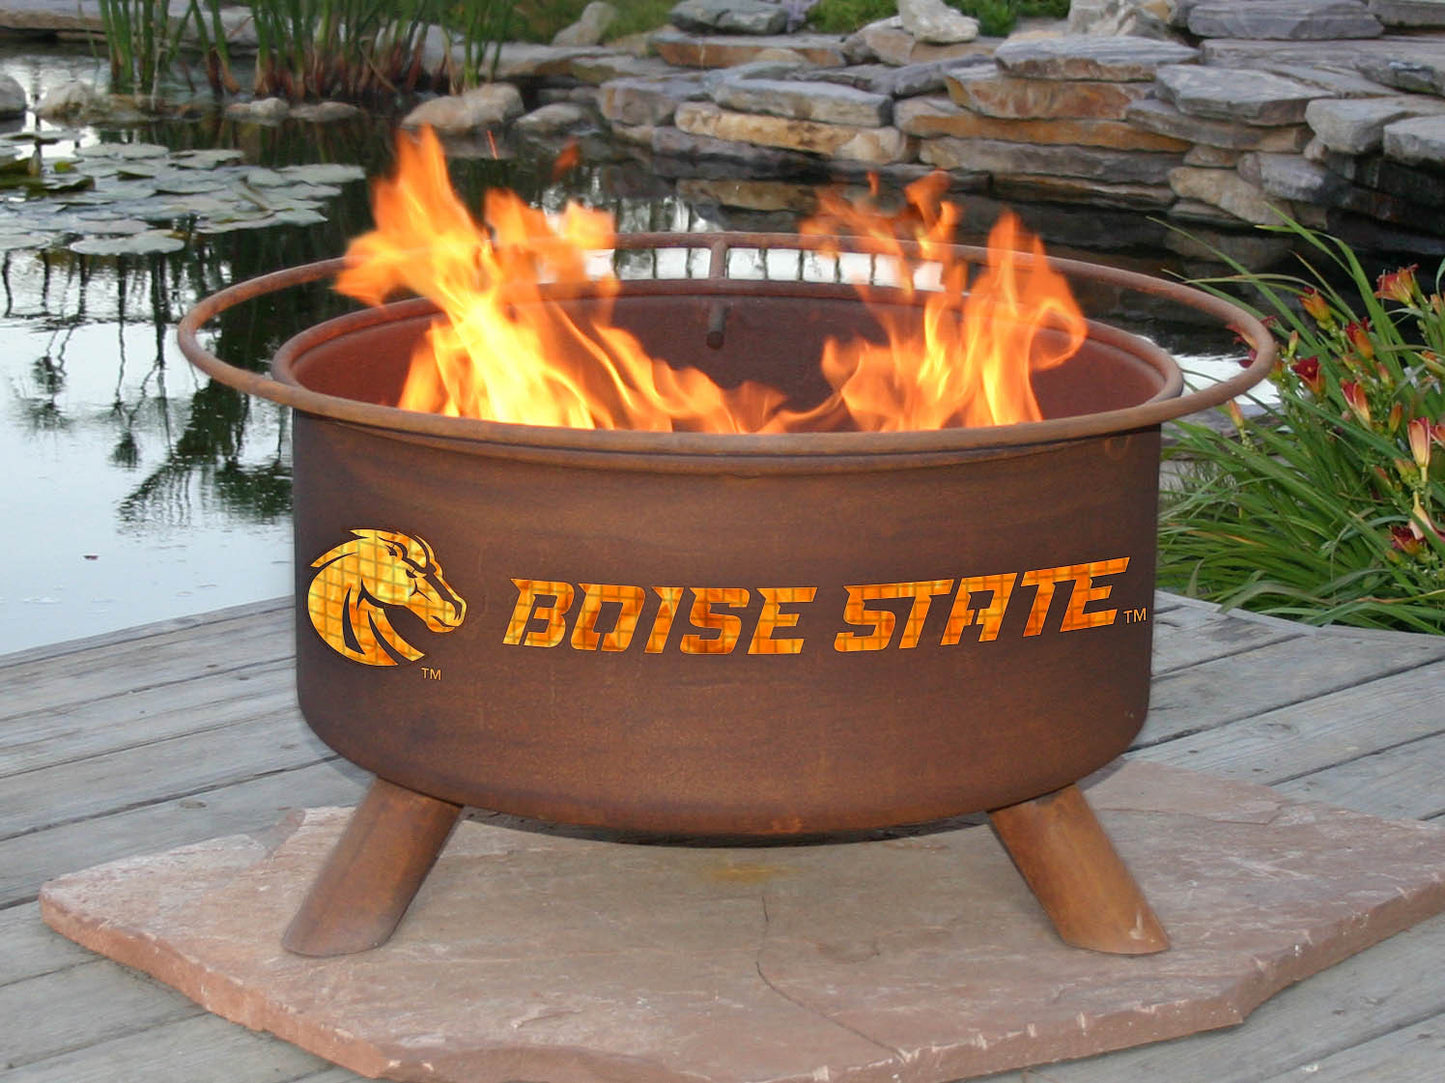 Collegiate Boise State University Logo Wood and Charcoal Steel Fire Pit, Fireplace - Yardify.com